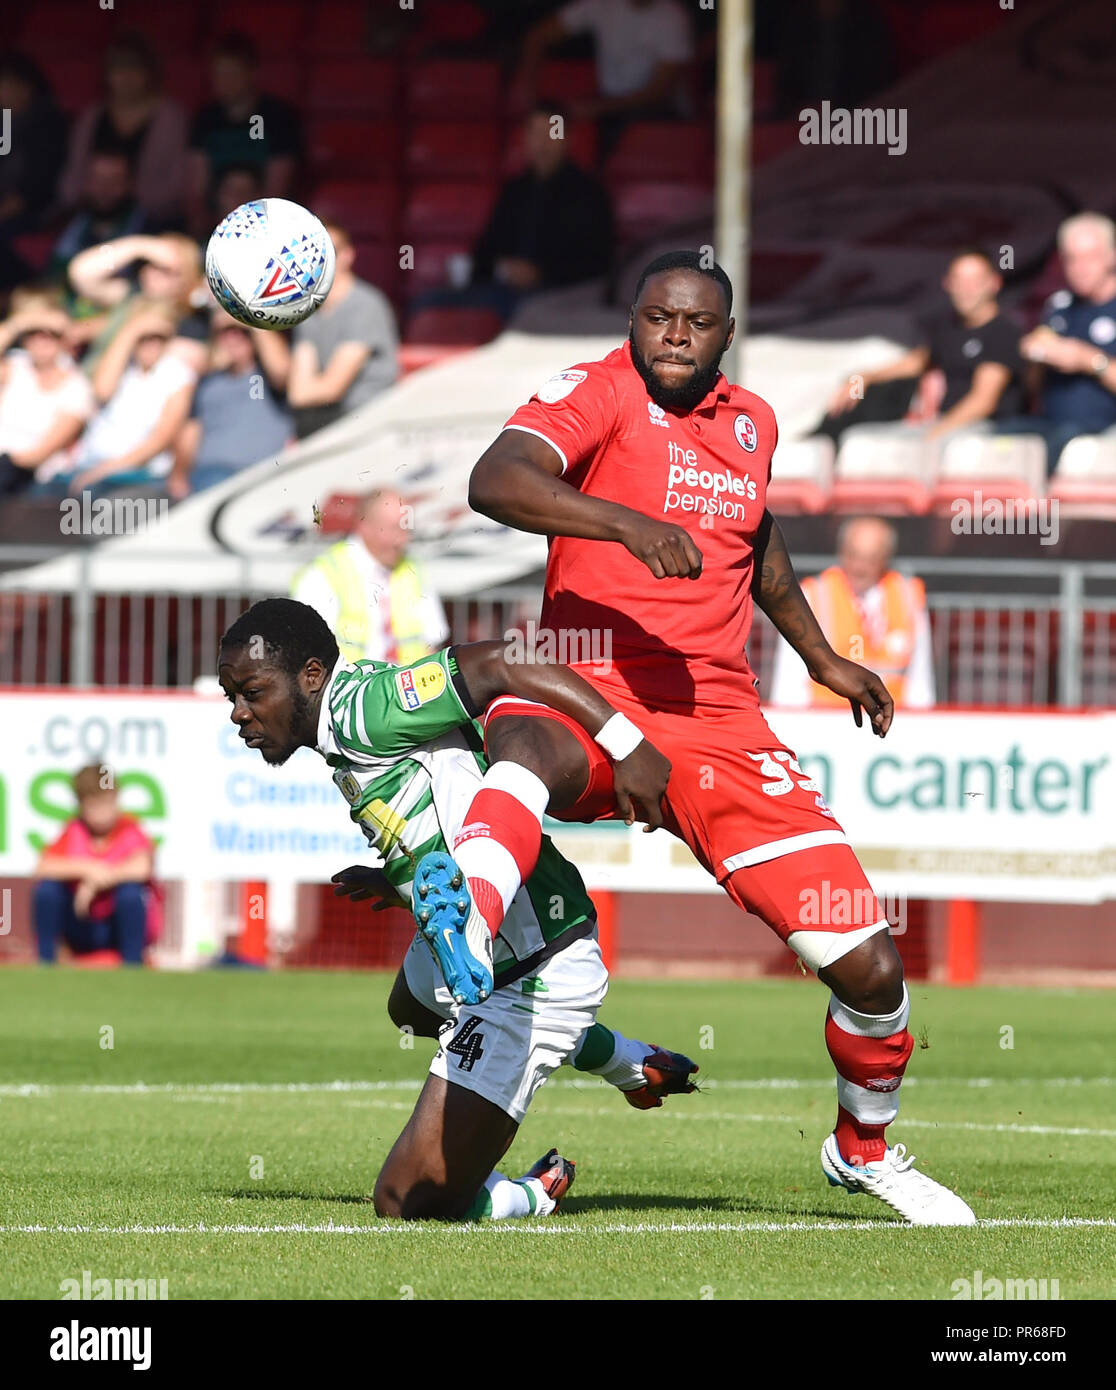 Bondz N'Gala of Crawley puts in a strong challenge on Olufela Olomola of Yeovil during the Sky Bet League 2 match between Crawley Town and Yeovil Town at the Broadfield Stadium , Crawley , 29 Sept 2018 - Editorial use only. No merchandising. For Football images FA and Premier League restrictions apply inc. no internet/mobile usage without FAPL license - for details contact Football Dataco Stock Photo